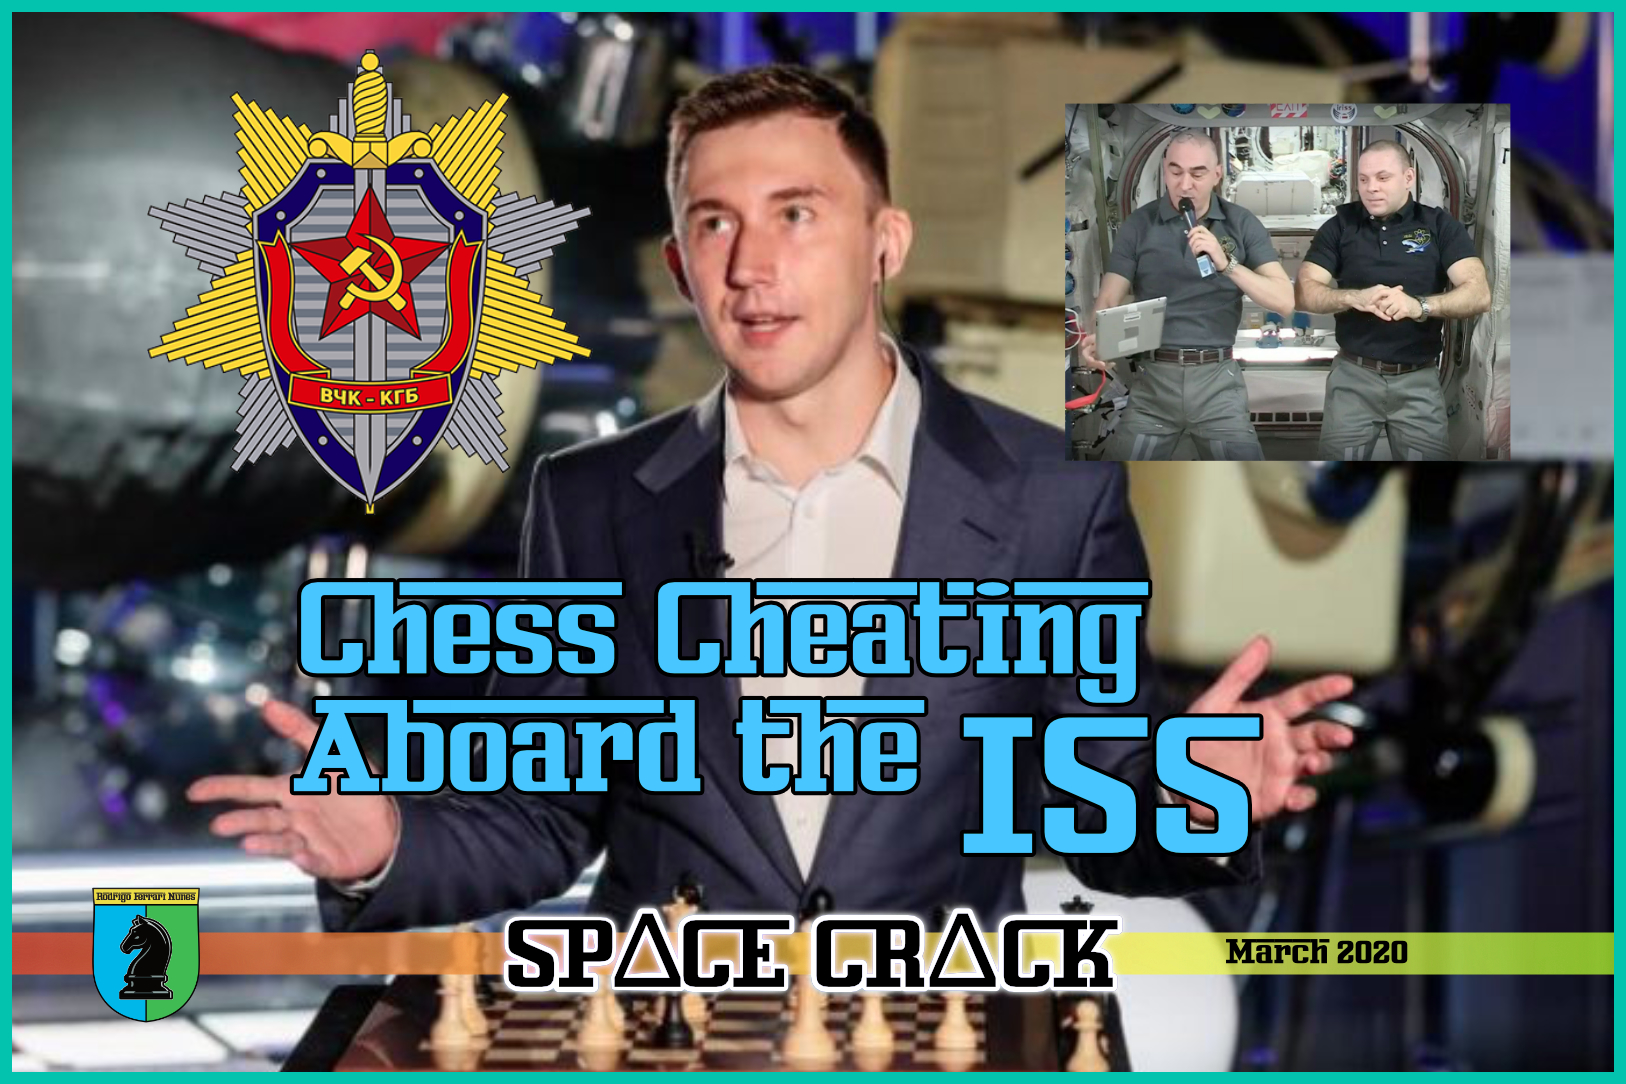 CHESS CHEATING ABOARD THE ISS